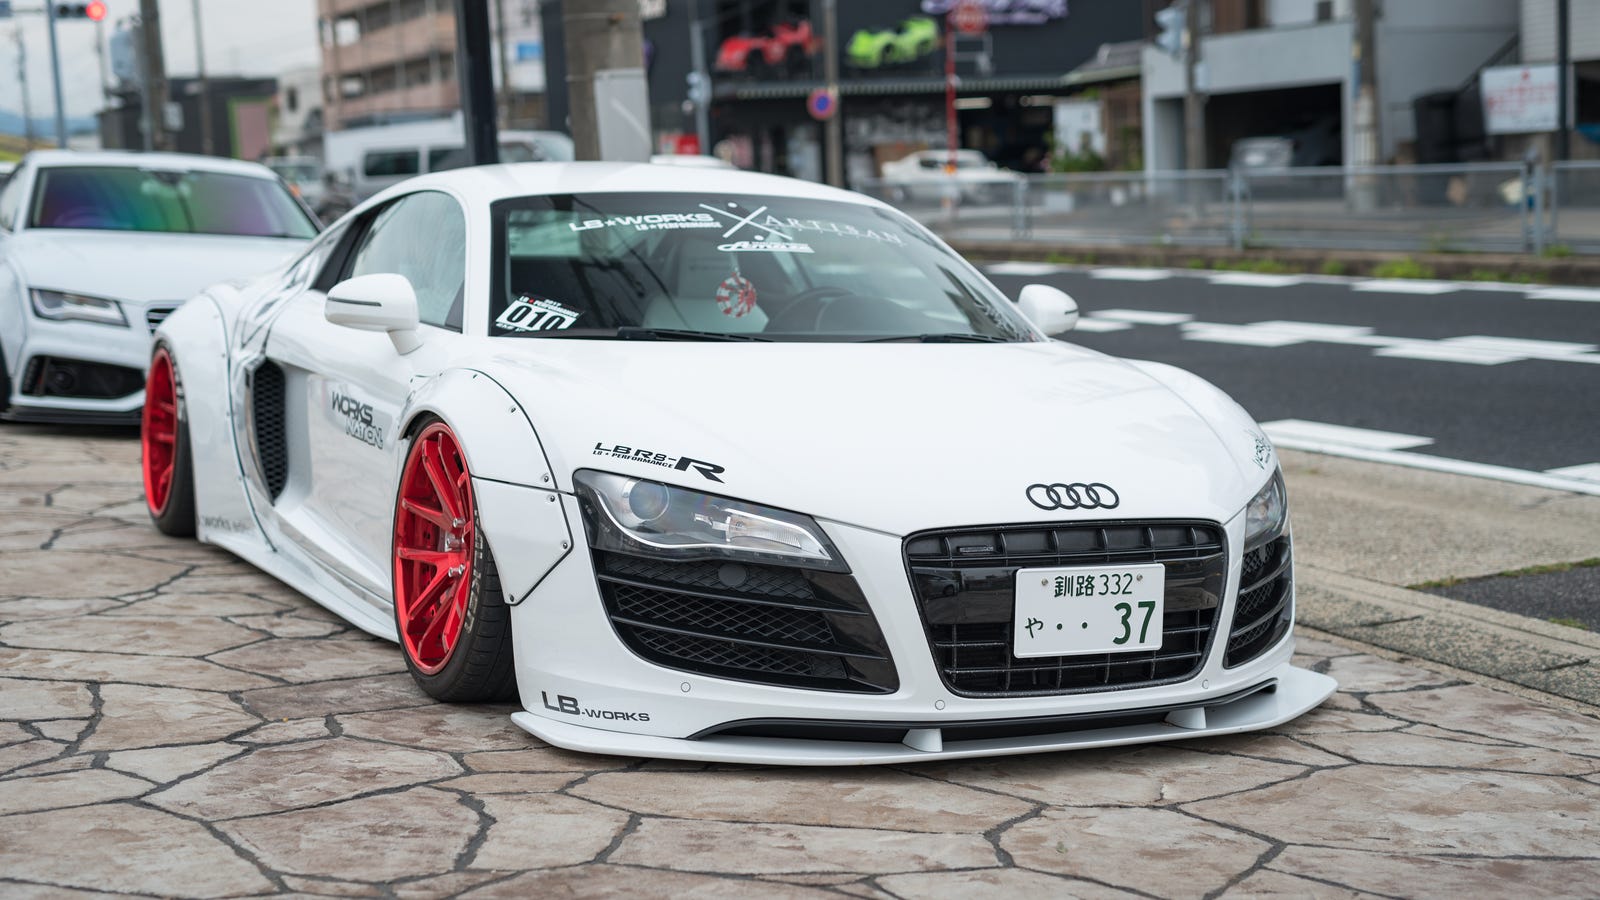 Liberty Walk’s Japanese Headquarters Is Just As Crazy As Their Tuned Cars